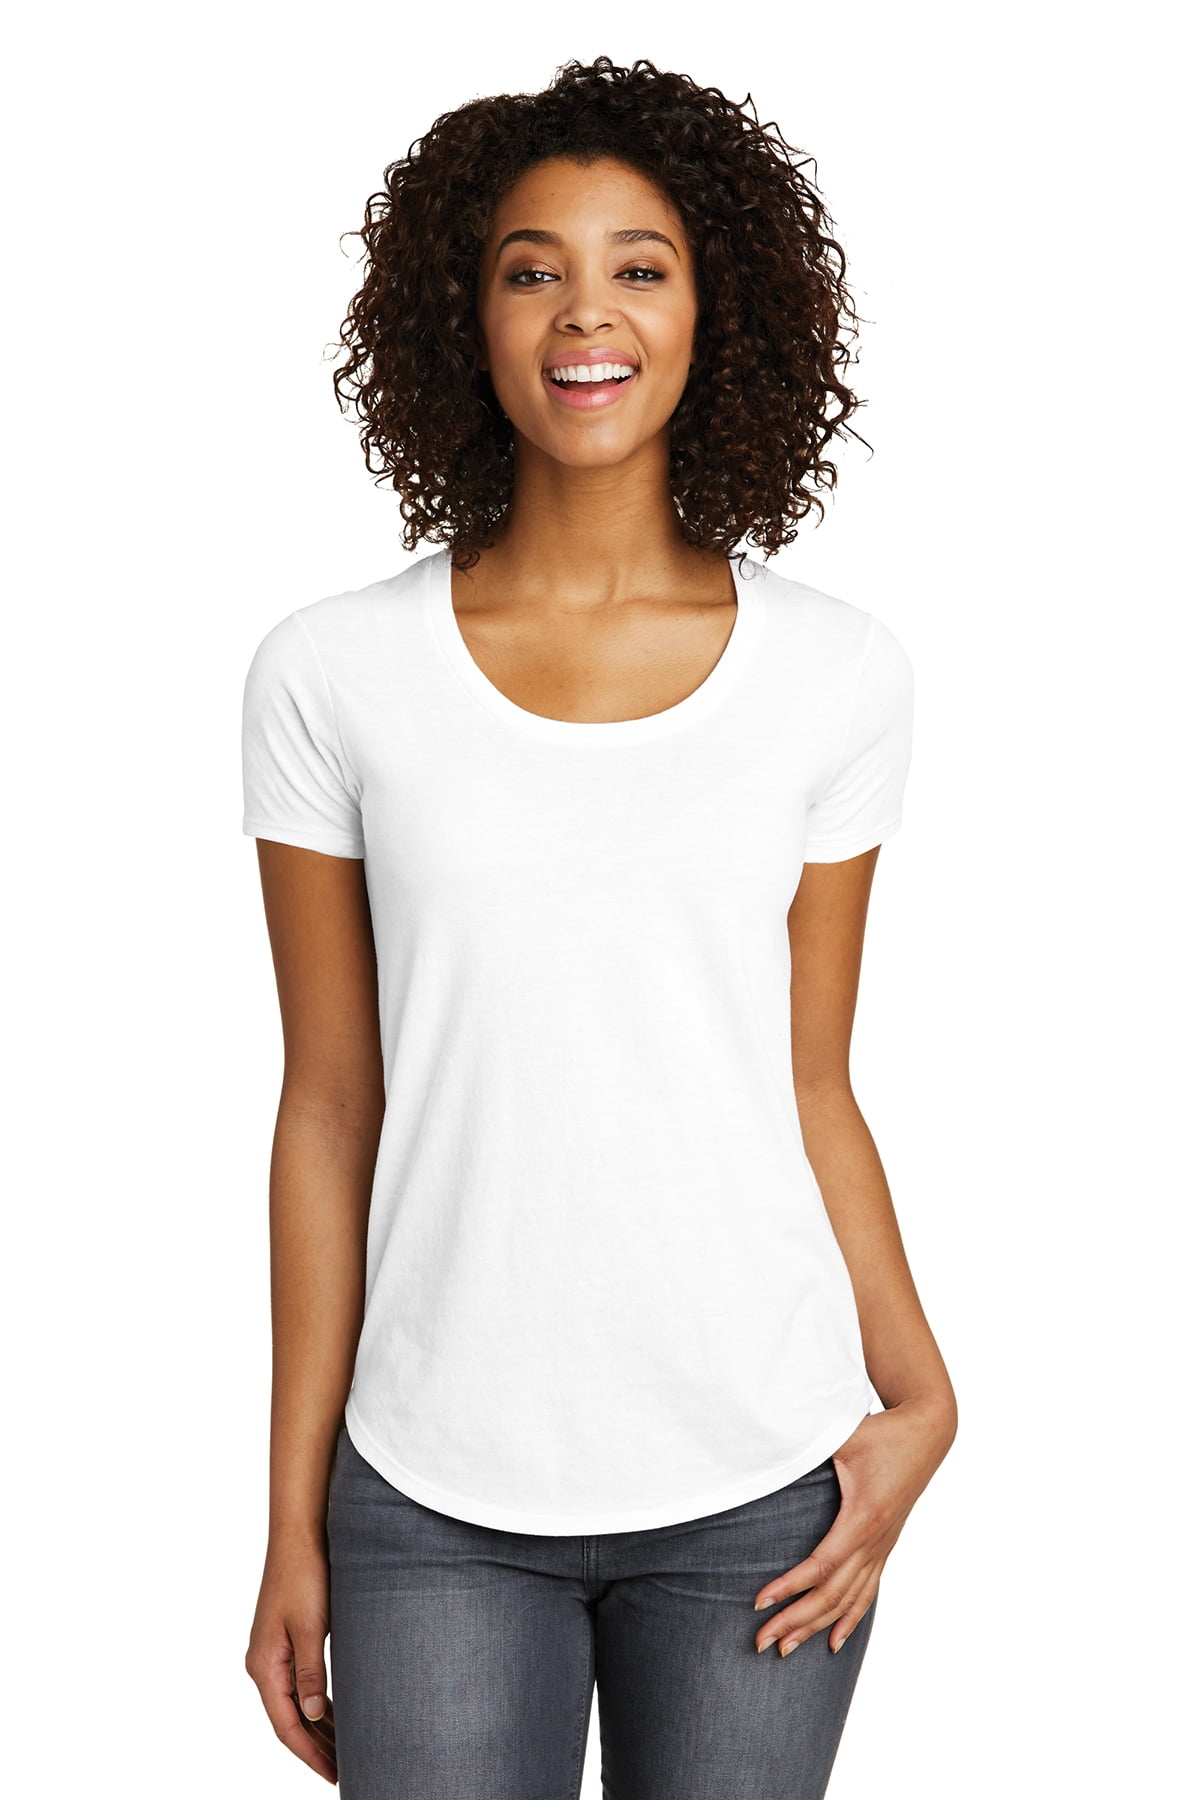 JustBlanks Women's Short Sleeve Fitted Very Important Tee 4.3-ounce, 100%  Cotton Form Fitting Scoop Neck T-Shirt for women - White - X-Small 